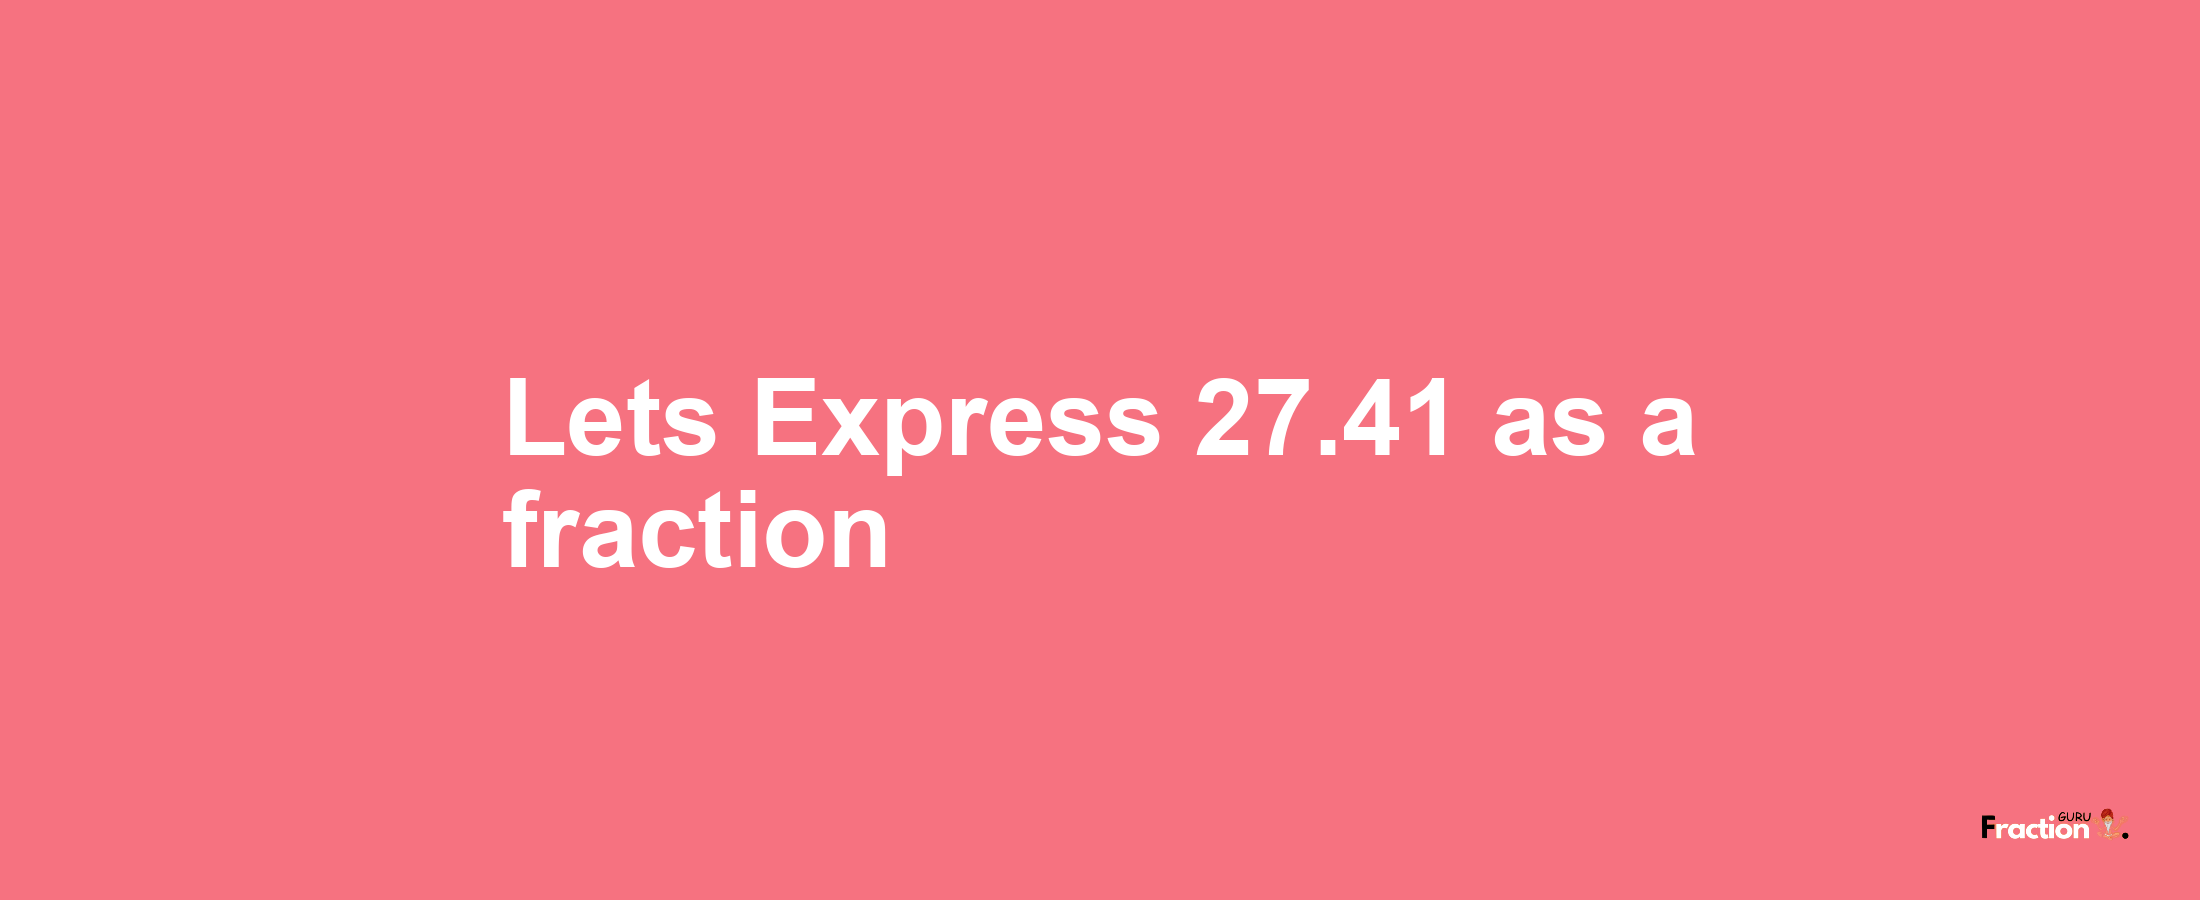 Lets Express 27.41 as afraction